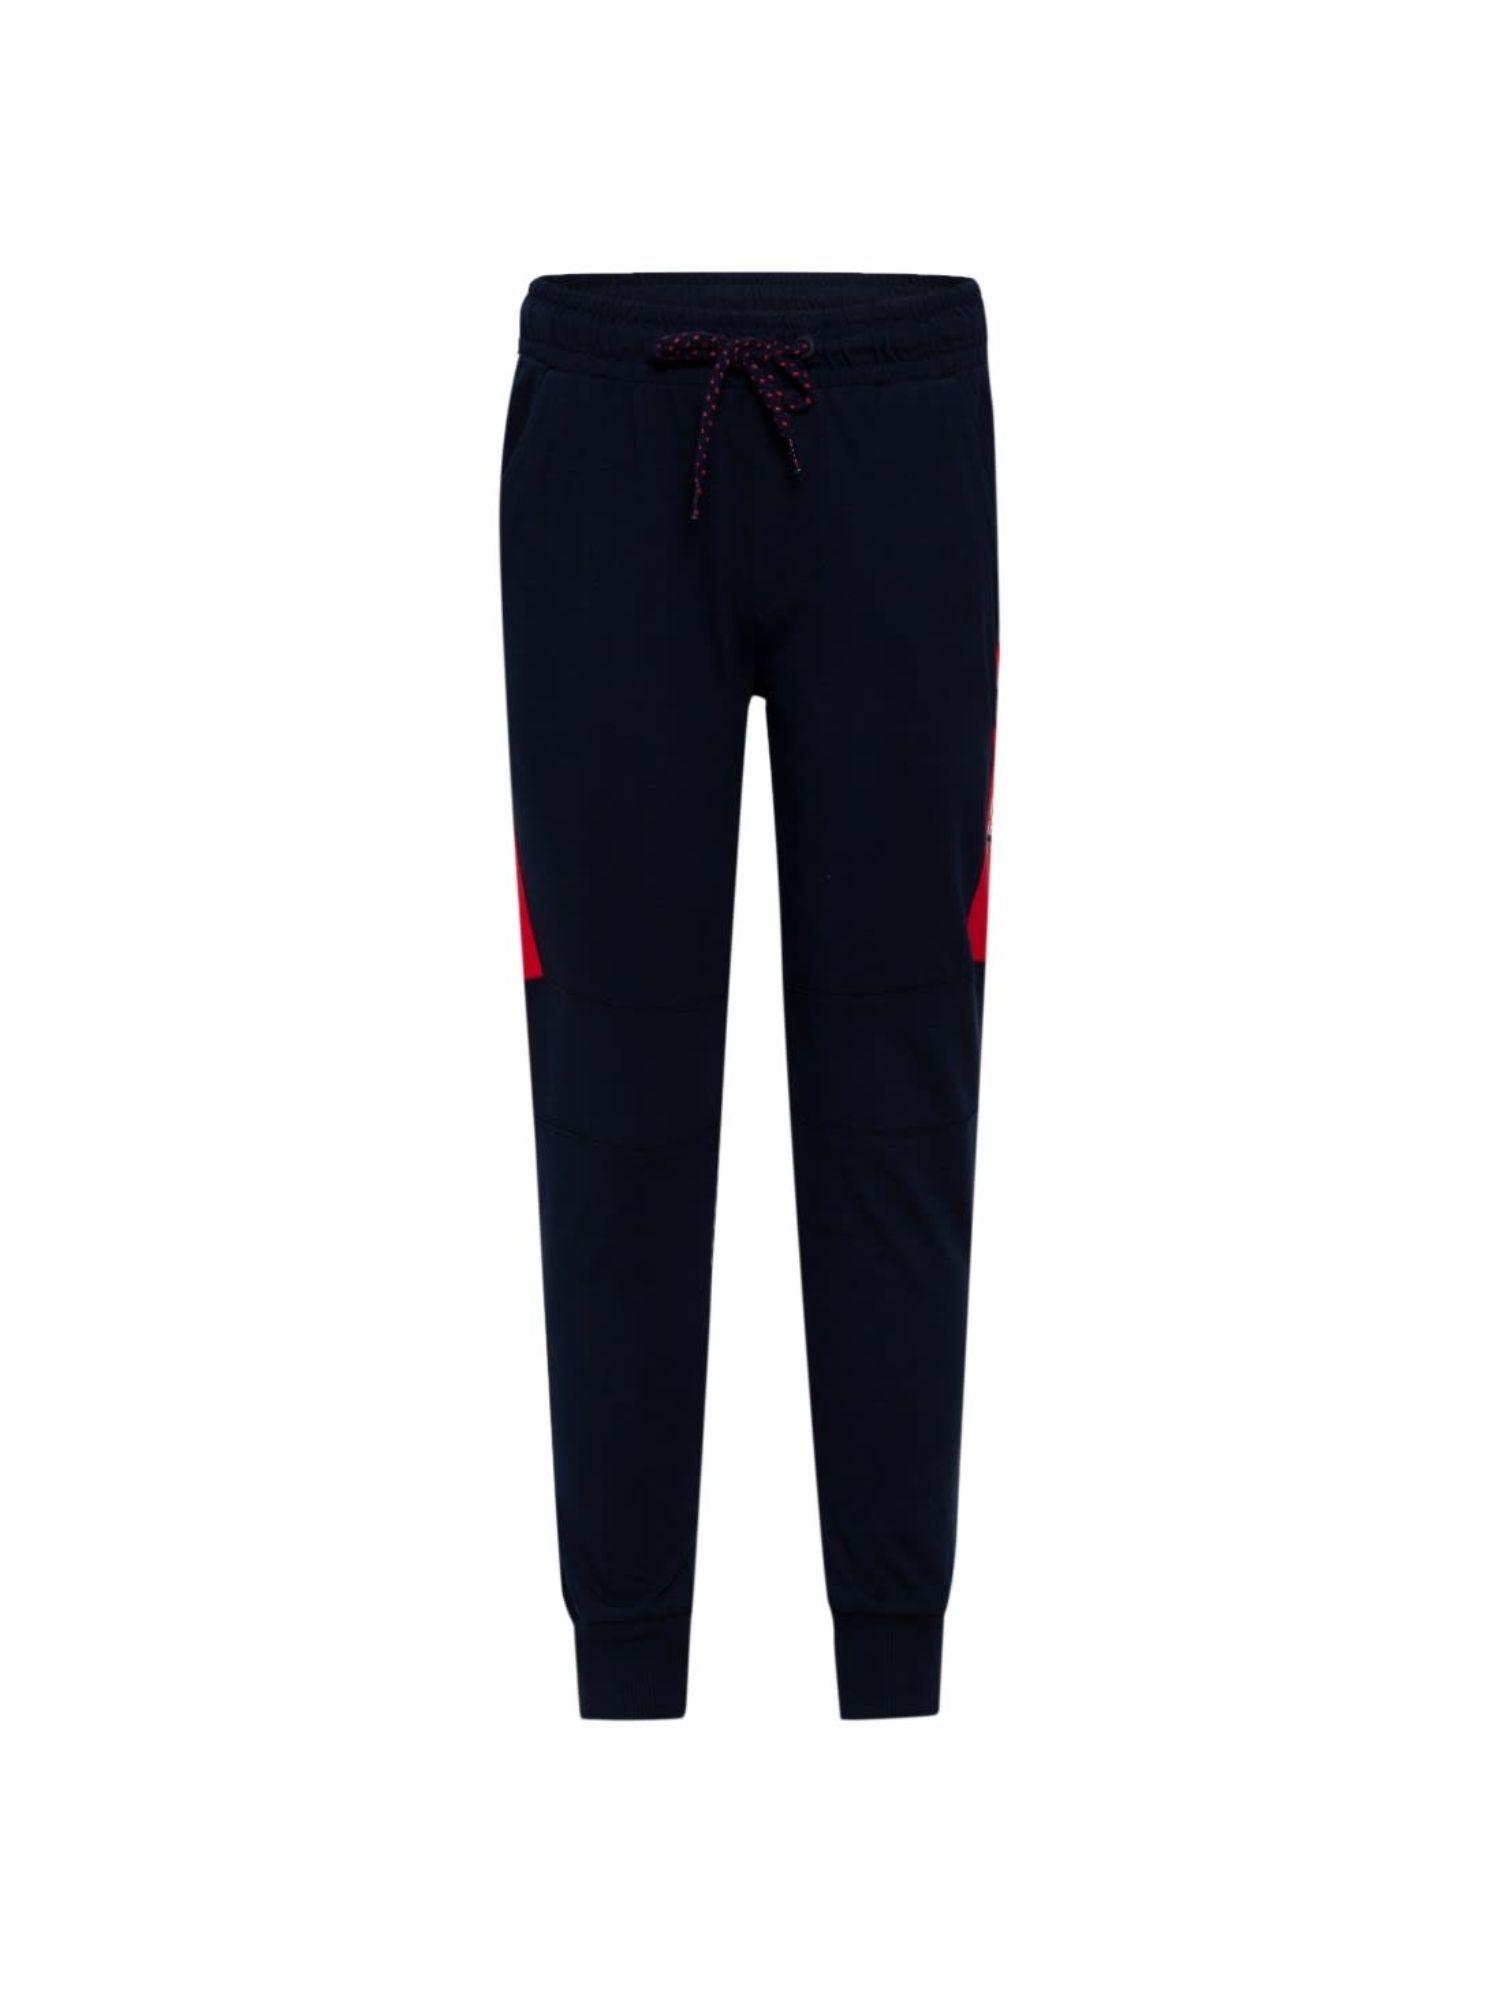 navy & team red jogger - style number - (ab18)